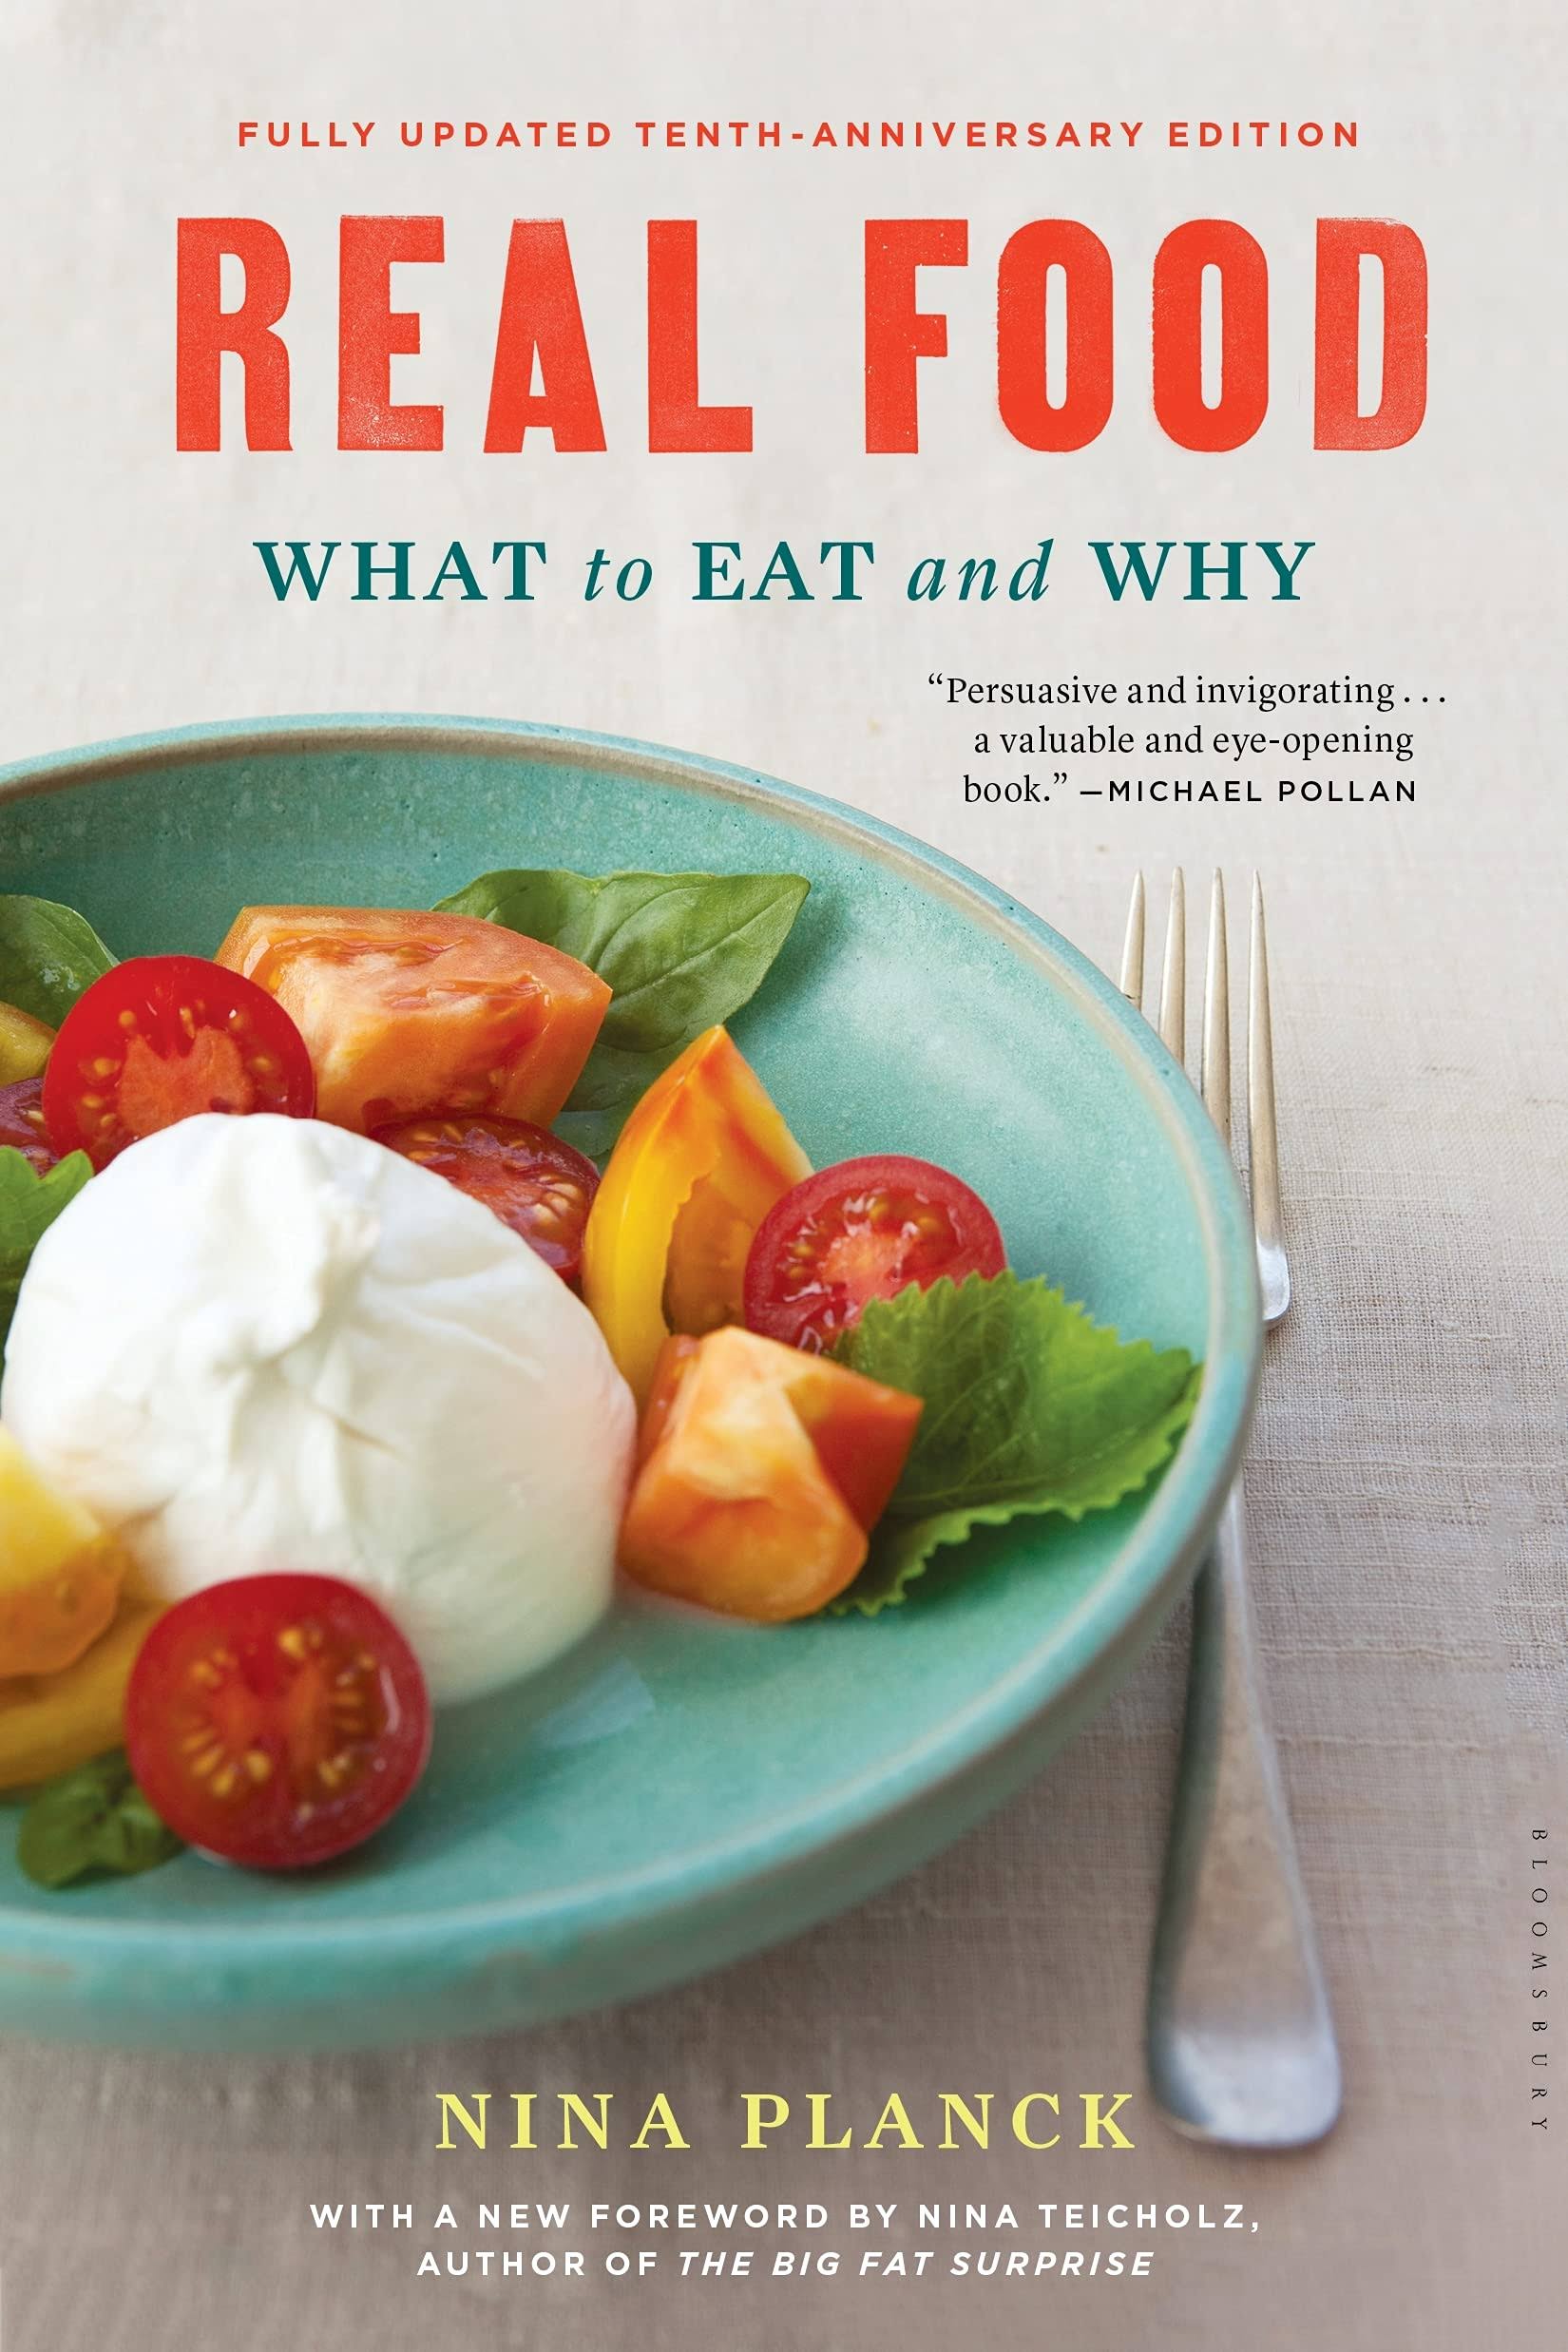 Real Food: What to Eat and Why [Book]